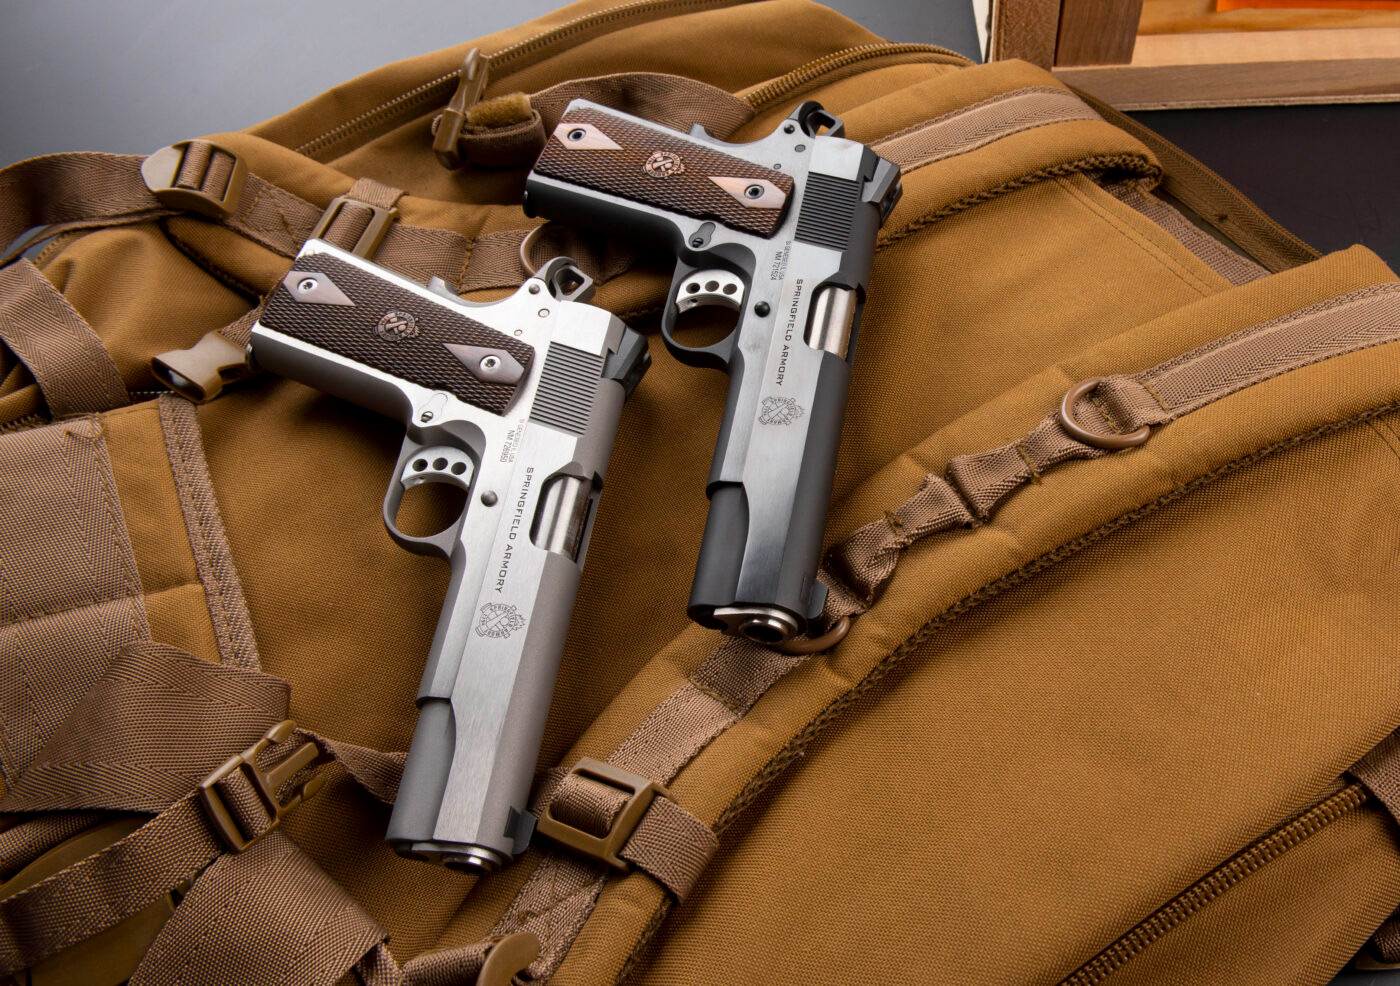 Springfield Armory Garrison 1911 pistols in blued and stainless versions